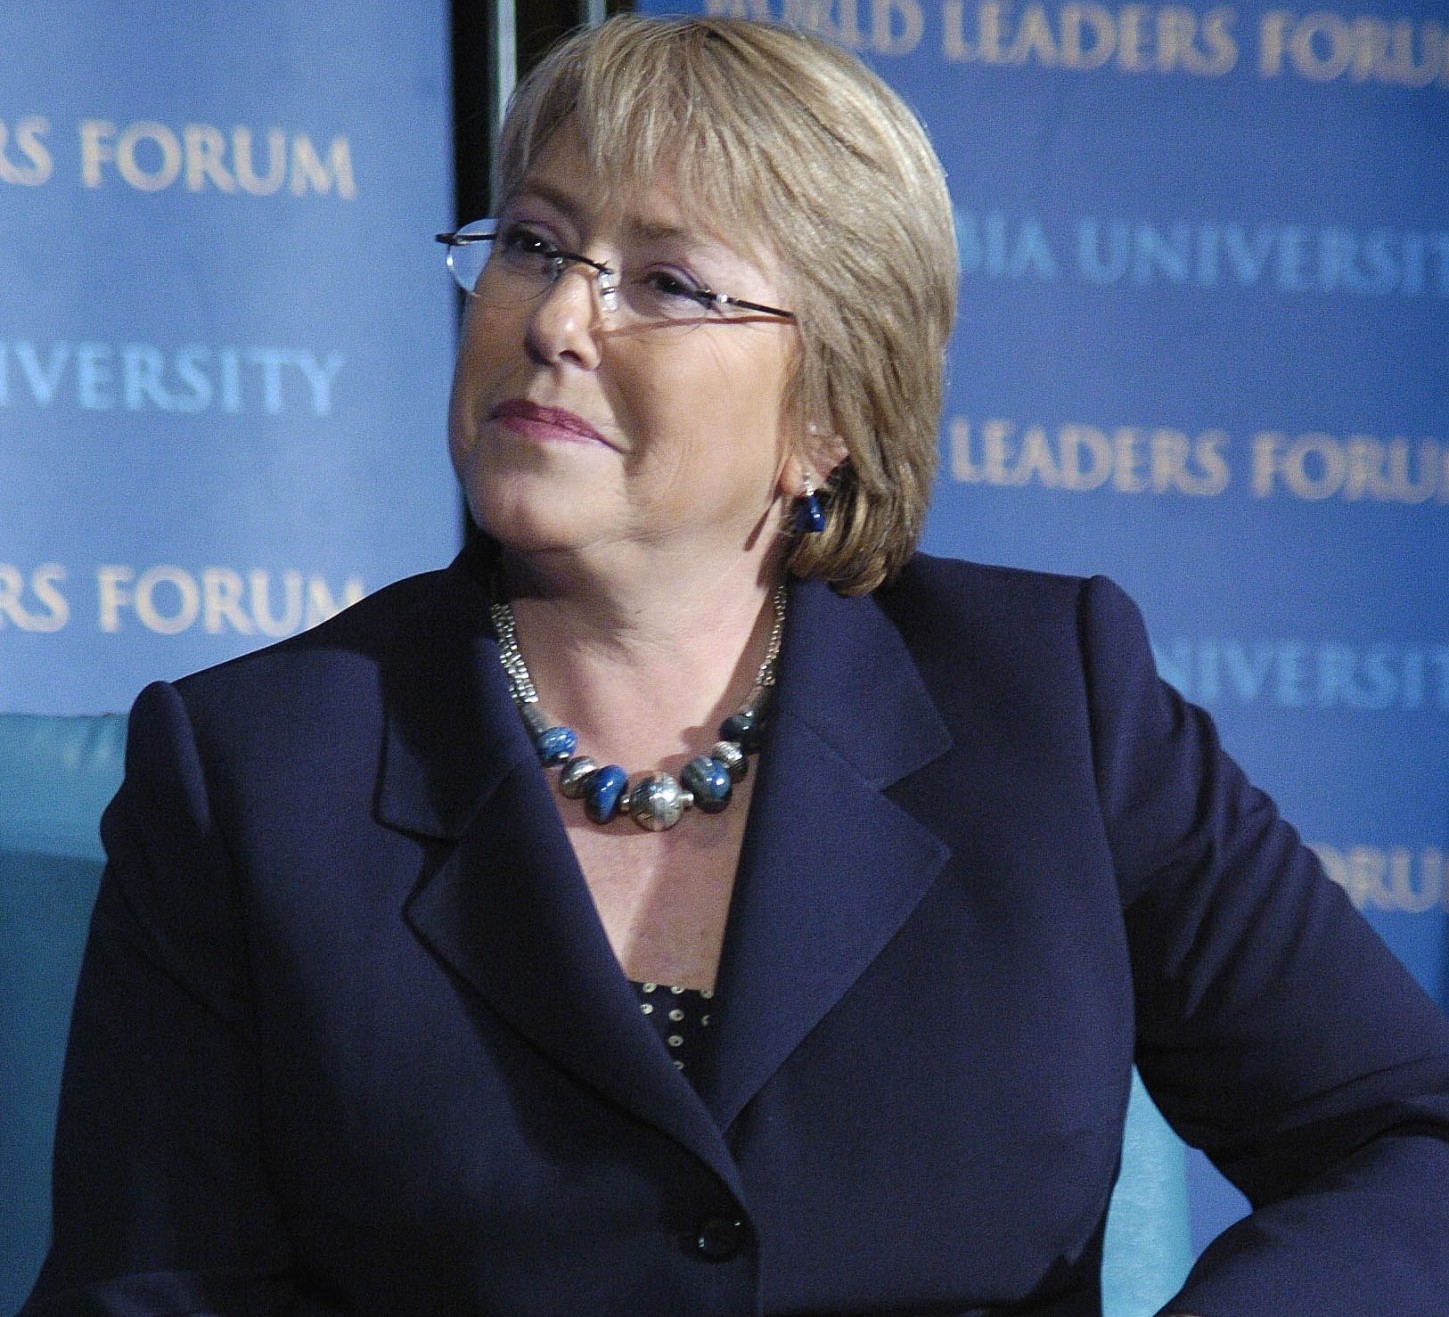 President Michelle Bachelet of the Republic of Chile